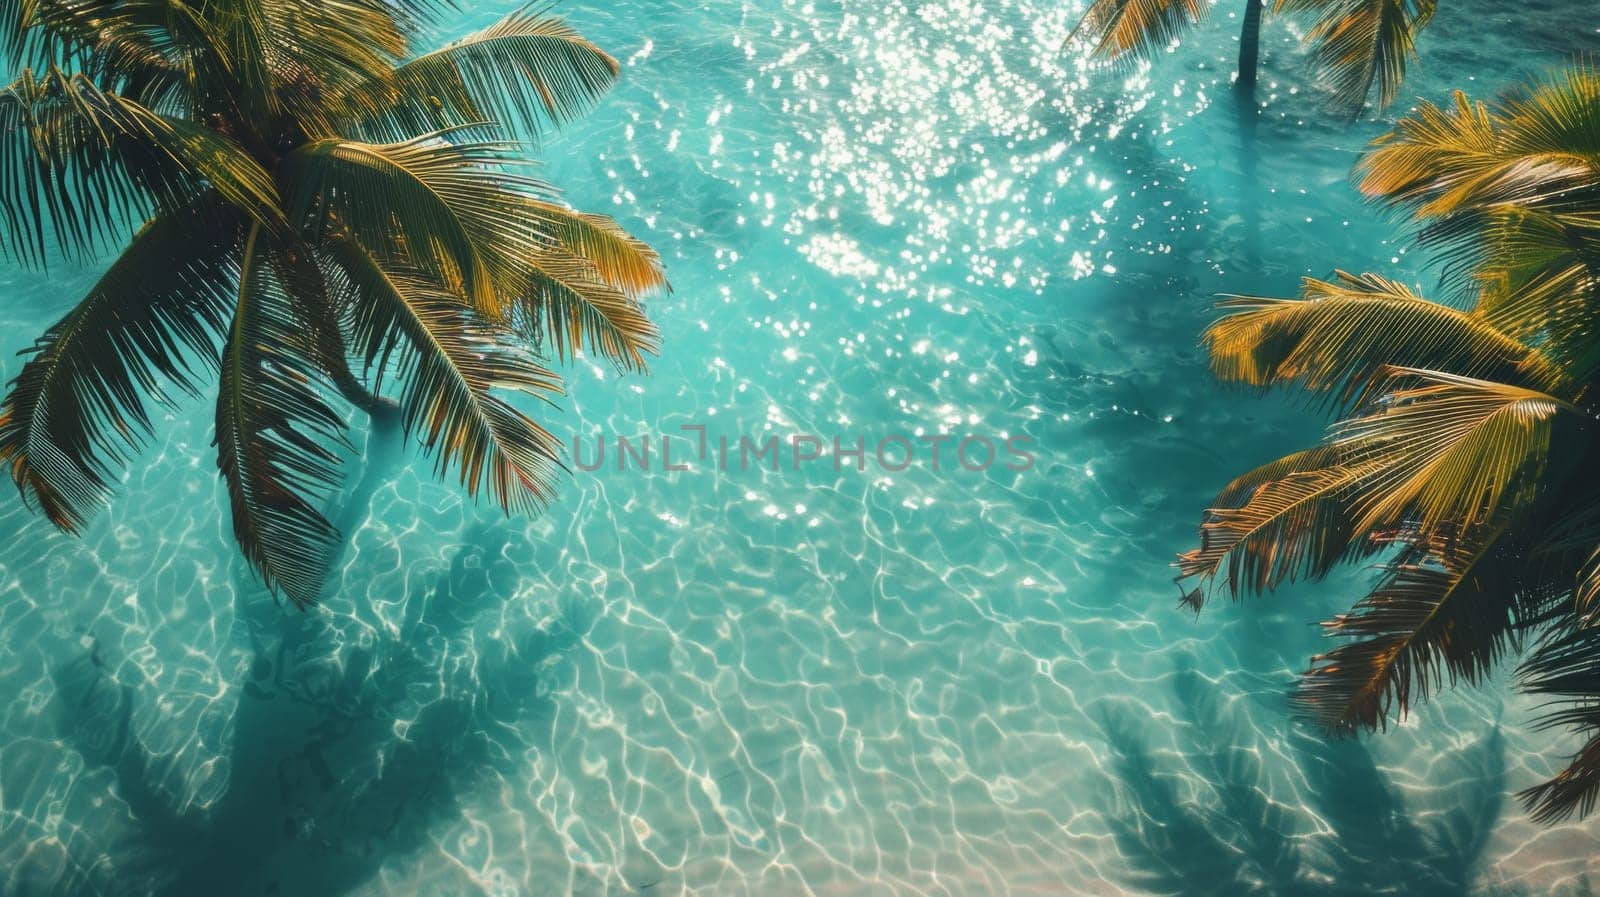 A view of a couple palm trees in the water next to some blue ocean, AI by starush